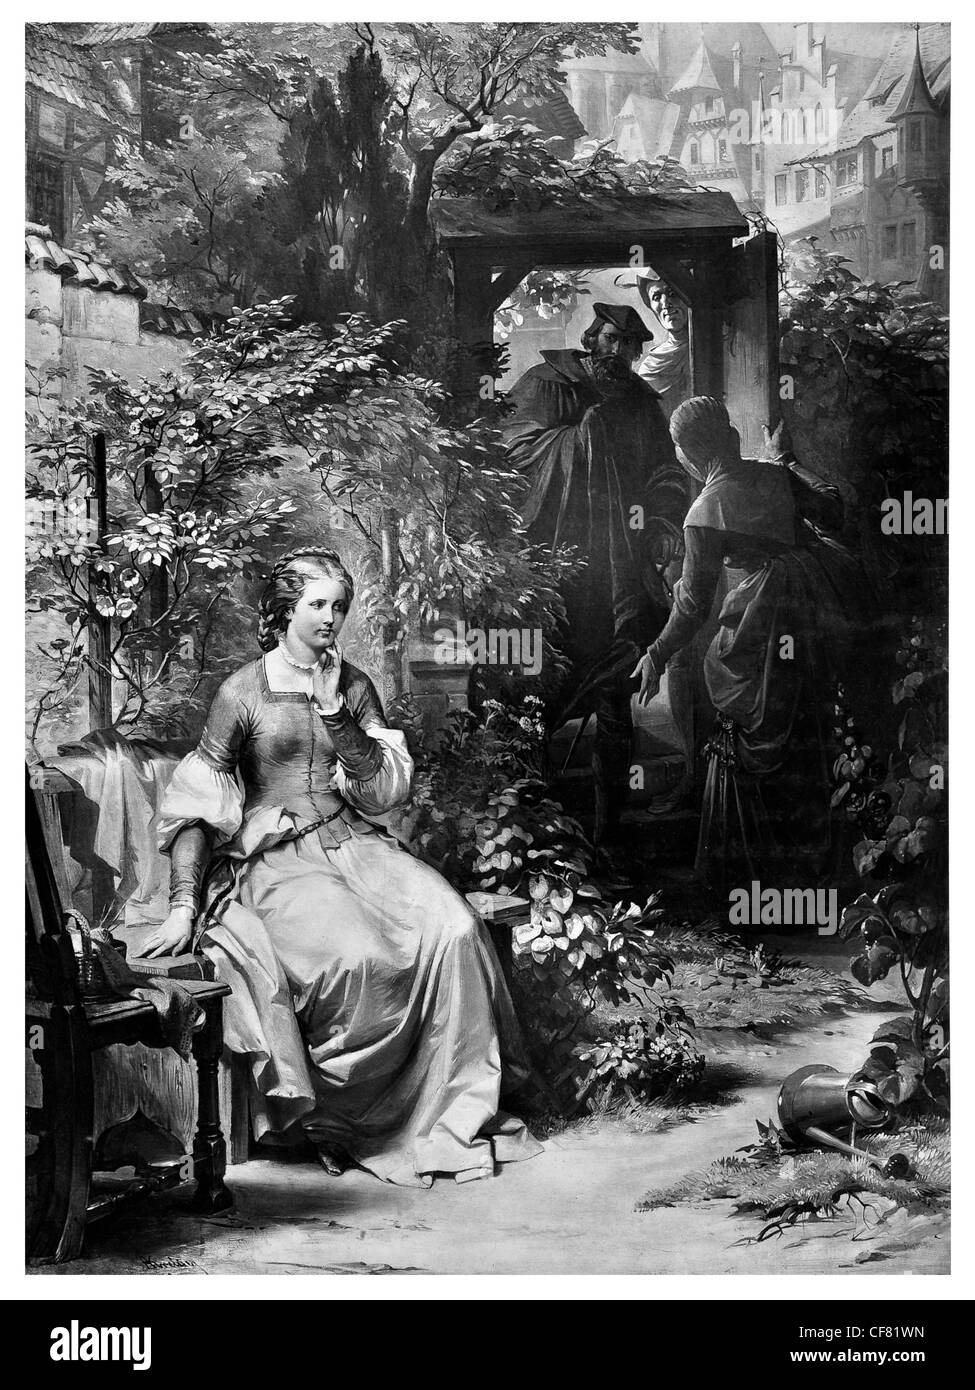 Faust  Johann Wolfgang von Goethe A tragedy 1870 period costume magical magic tale legend myth story drama theatre act character Stock Photo